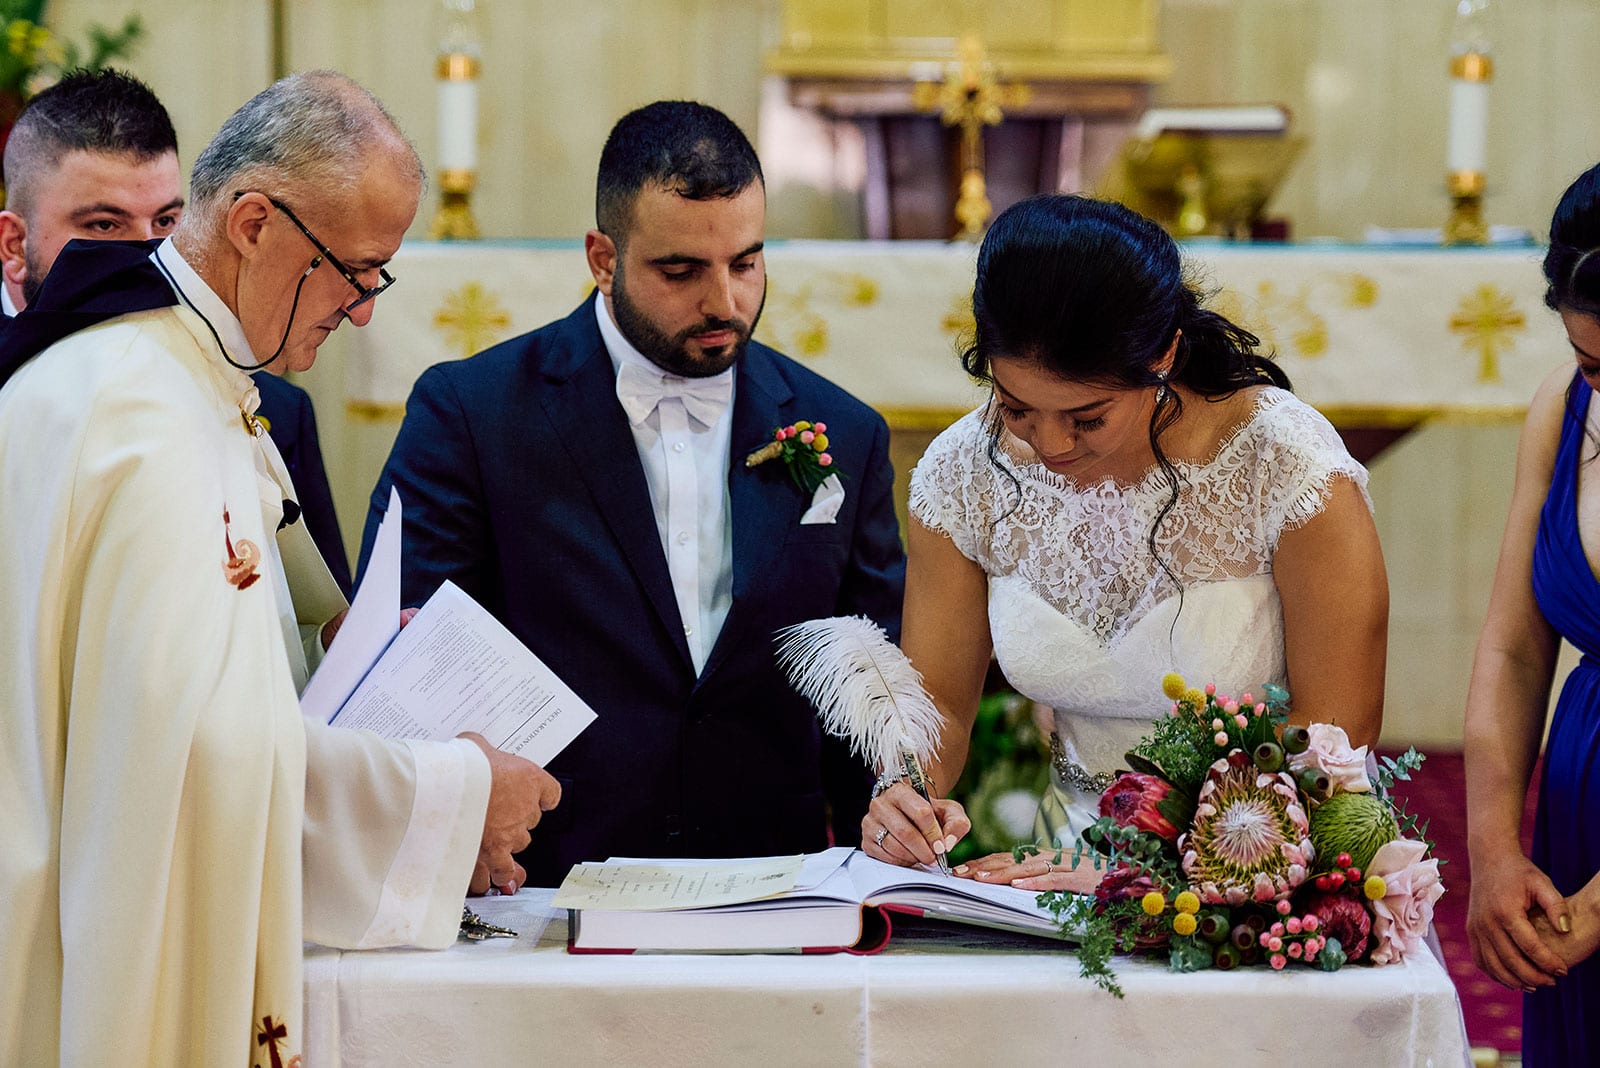 Signing the register at St Charbel